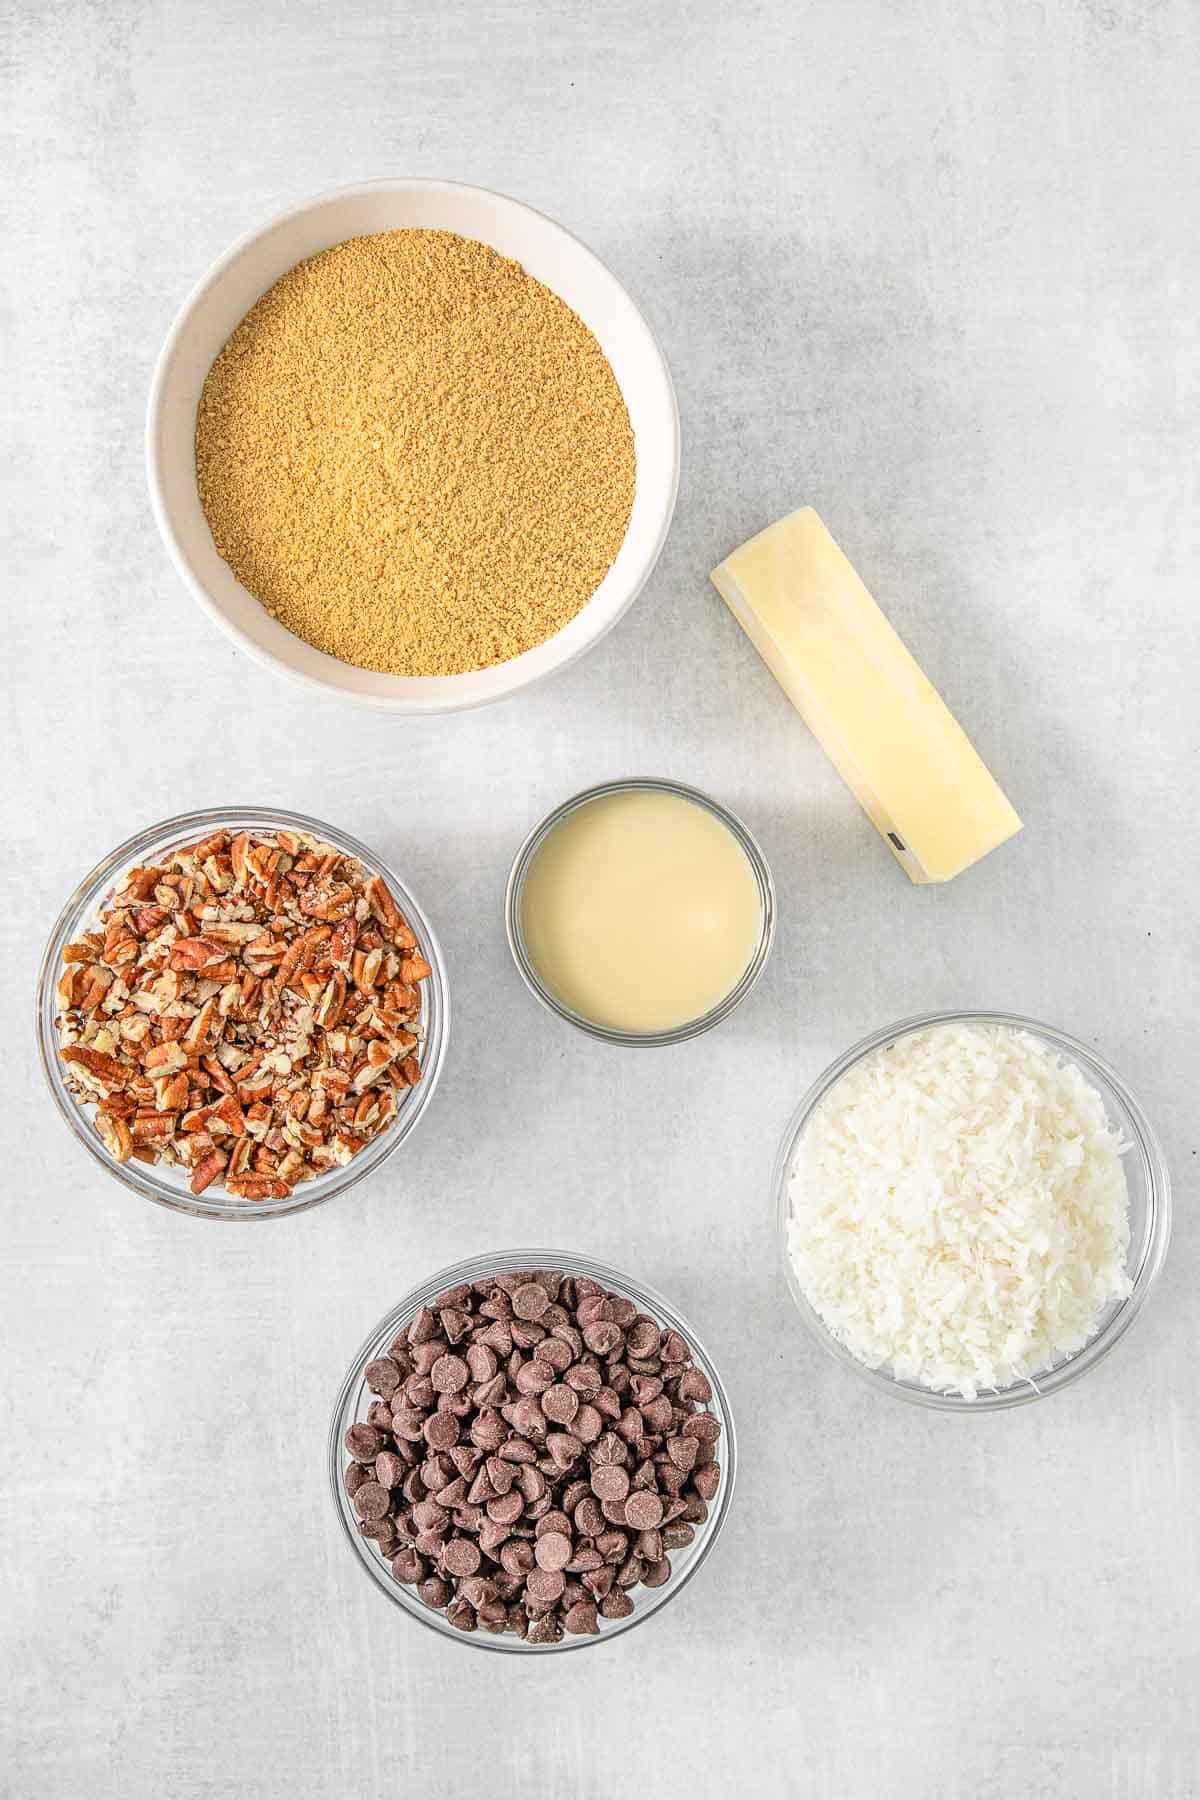 Several bowls of ingredients for Magic Cookie Bars - Graham Cracker Crumbs, Salted Butter, Sweetened Condensed Milk, Dark Chocolate Chips, Chopped Pecans and Shedded Sweetened Coconut.